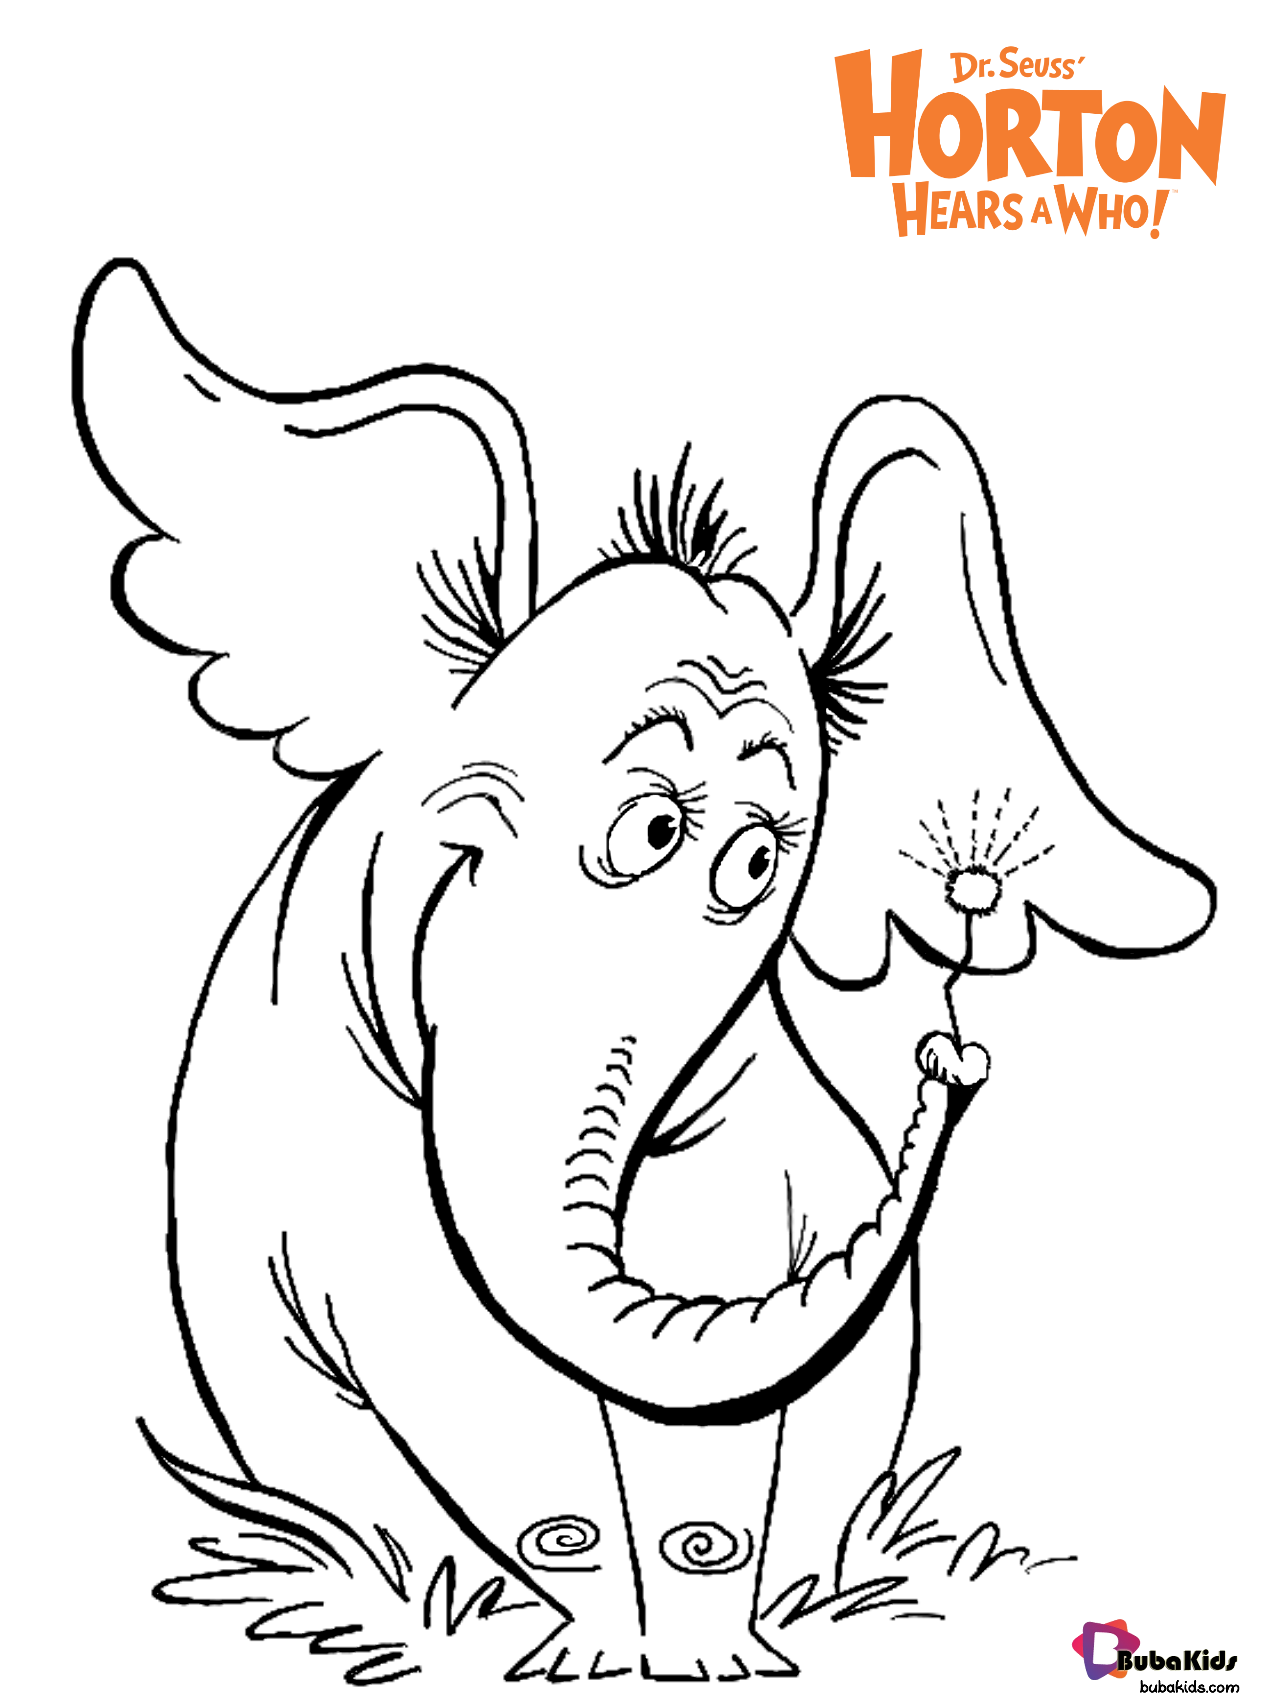 Dr seuss horton hears a who free download coloring pages for kids Wallpaper